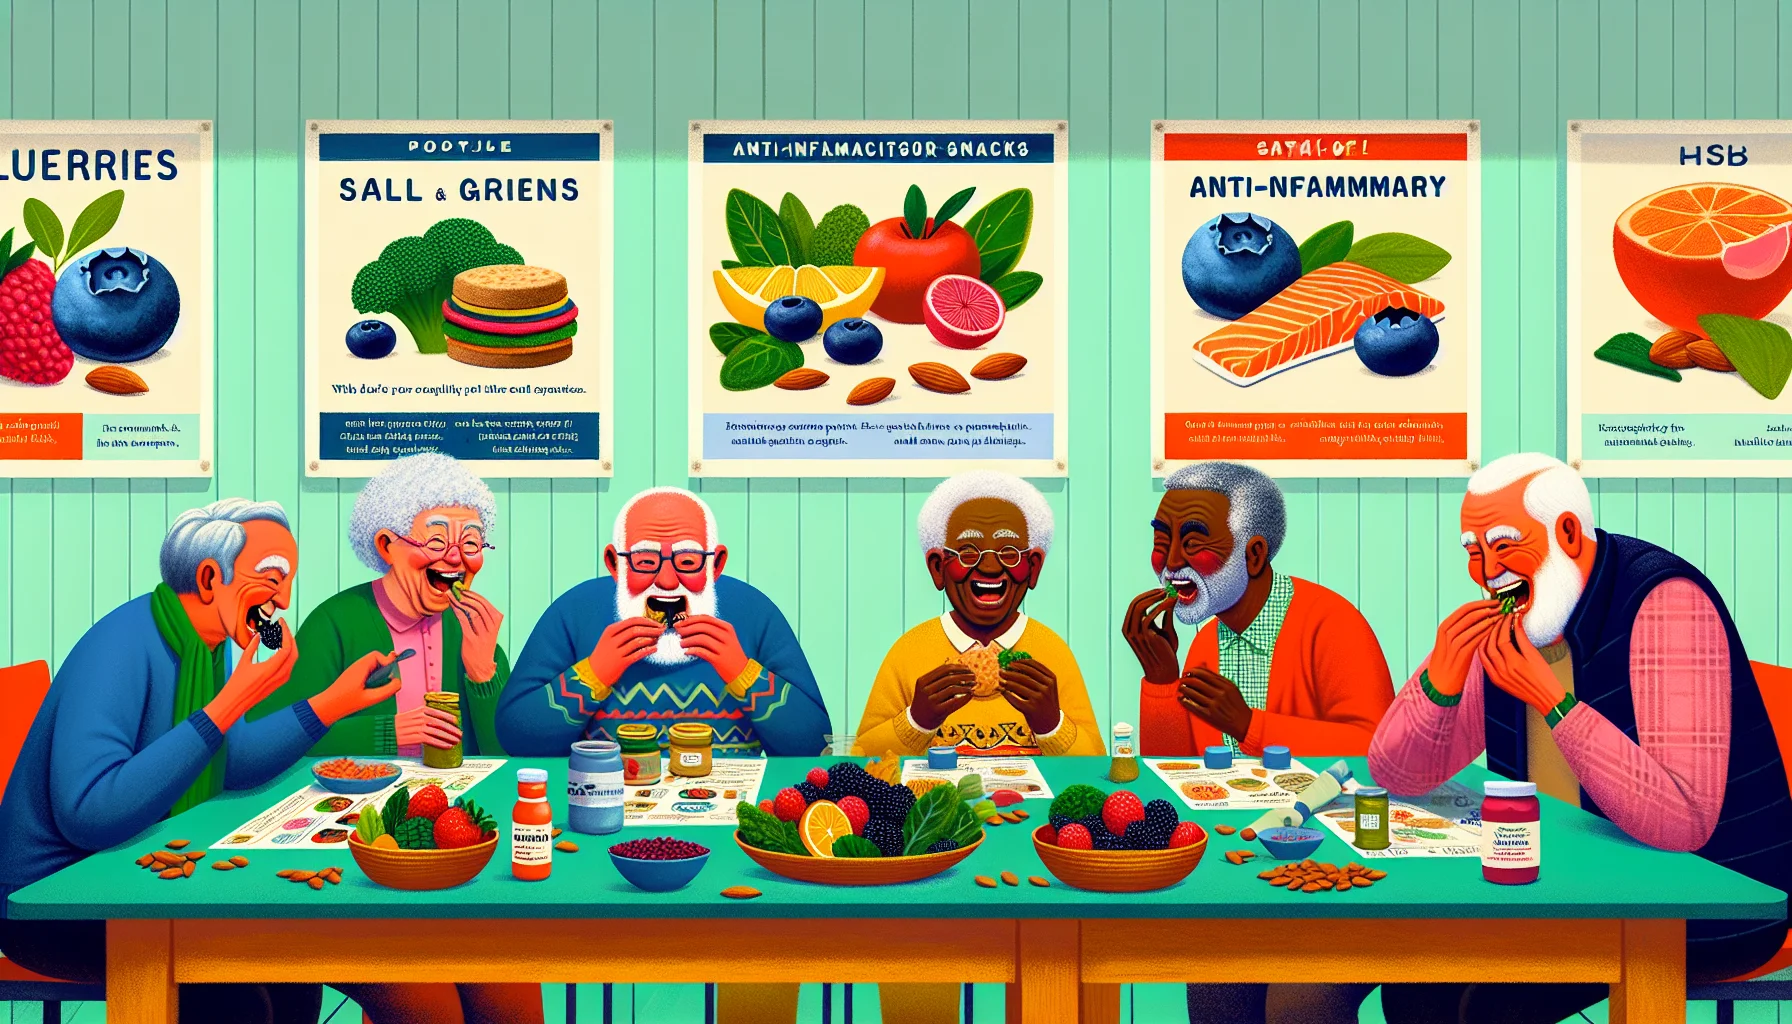 Illustrate a humorous scene in a community center for seniors. In the middle of their afternoon activities, a group of four lively seniors of diverse descents - Black, Hispanic, Caucasian and South Asian - are engrossed in a sort-of competition. They're all humorously munching on an array of colorful, anti-inflammatory snacks spread over the table: blueberries, salmon, leafy greens, almonds etc. Their expressions are exaggerated, showing the fierceness of their 'snack-off', yet their eyes sparkle with fun & camaraderie. Dotted around the room are posters promoting healthy diets with captions full of puns and humor.